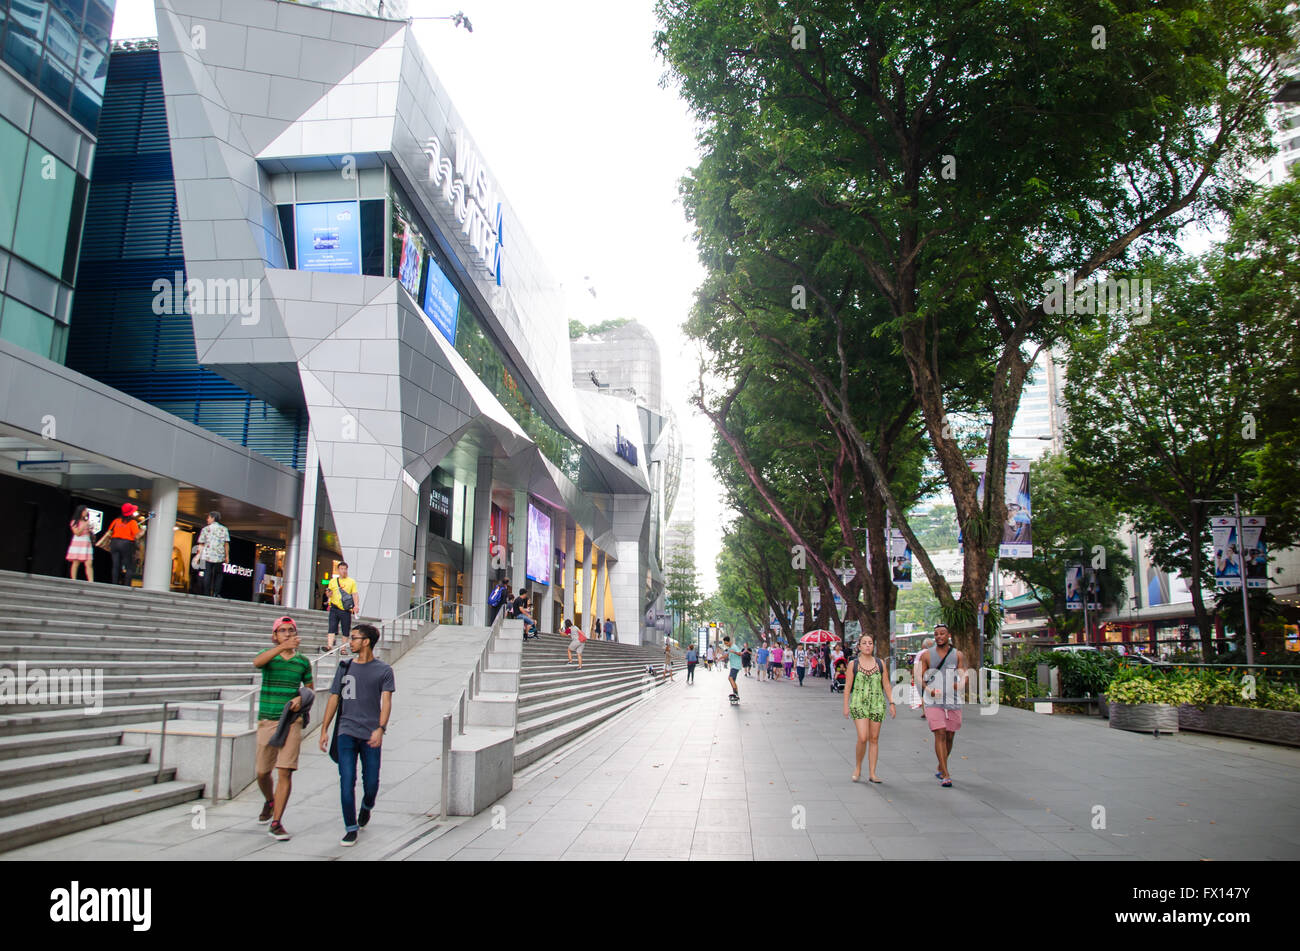 Orchard Road, Heart of the Shopping District in Singapore